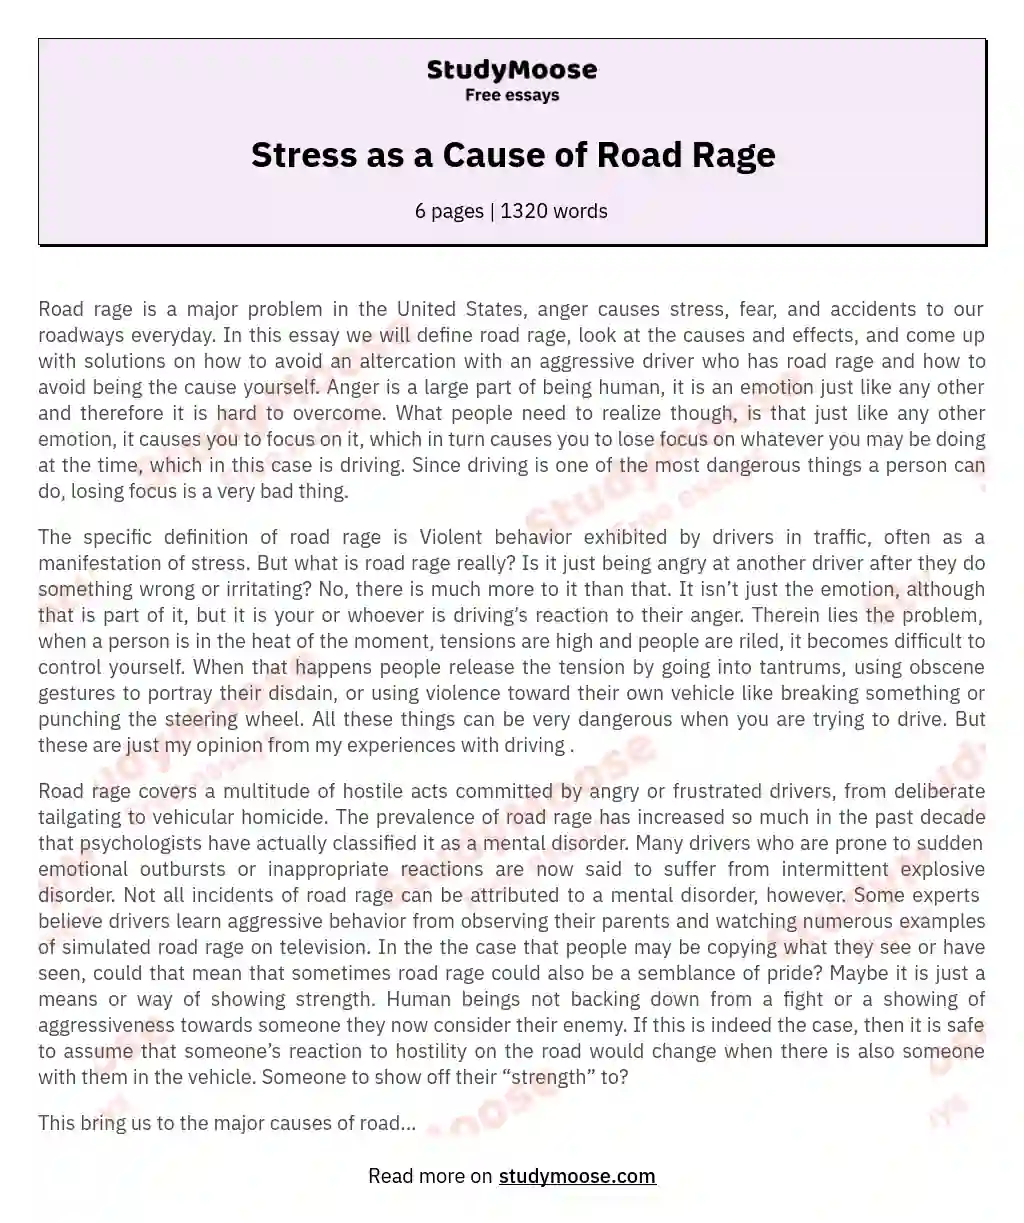 Stress as a Cause of Road Rage essay